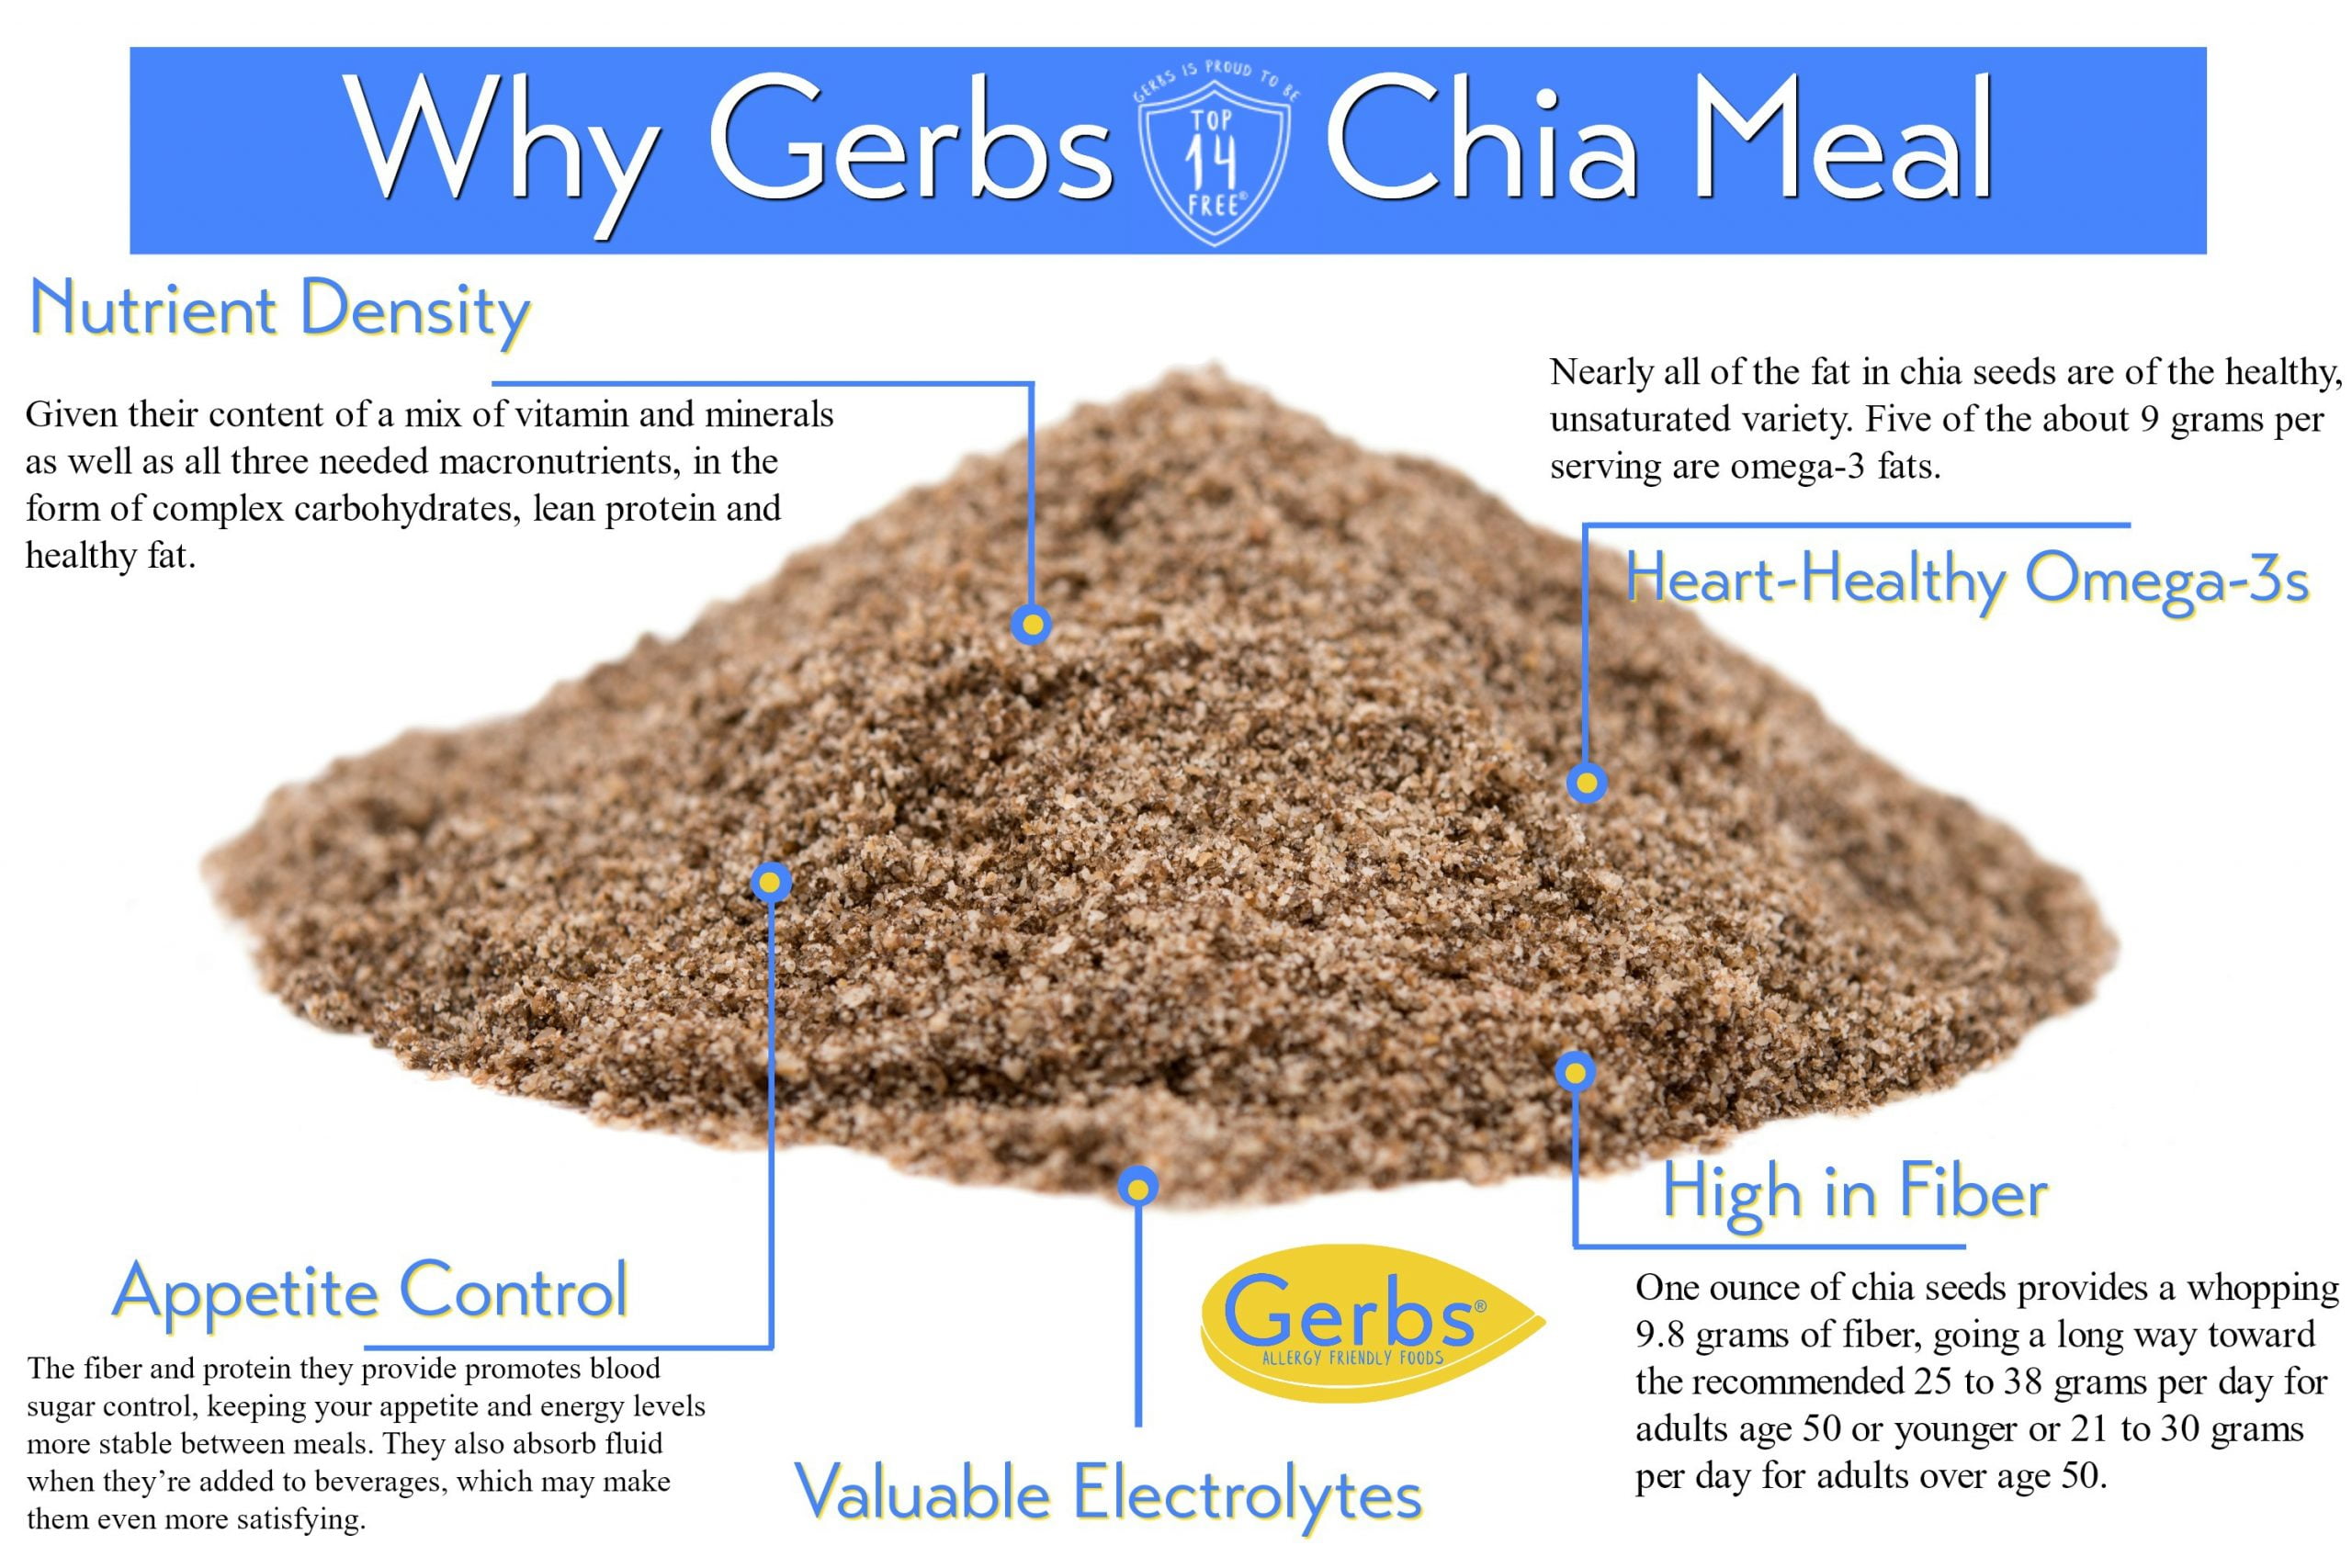 30 LB of Chia Seed Meal - Full Oil Content Protein Powder - Gerbs